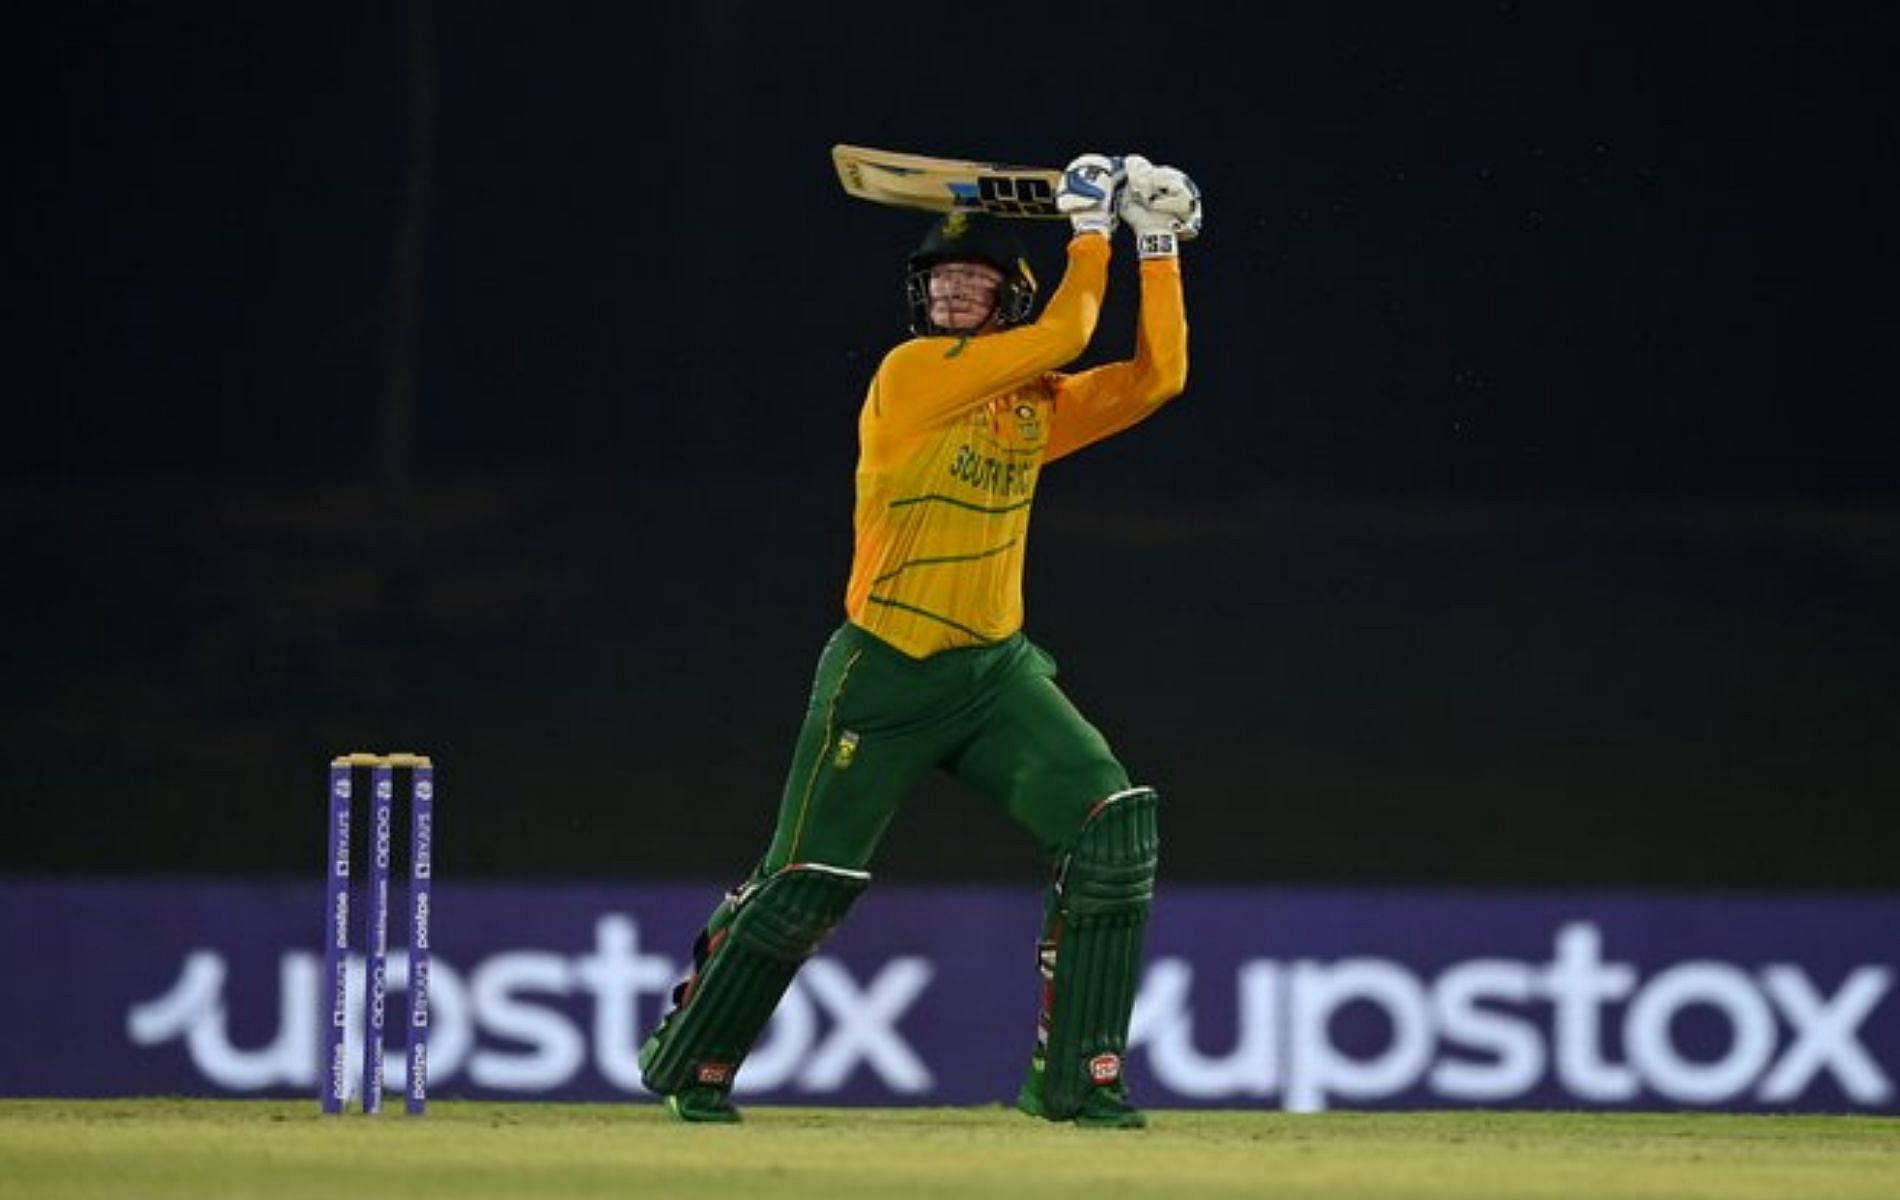 Rassie van der Dussen will look to chip win with solid knocks in the middle for South Africa in the T20 World Cup